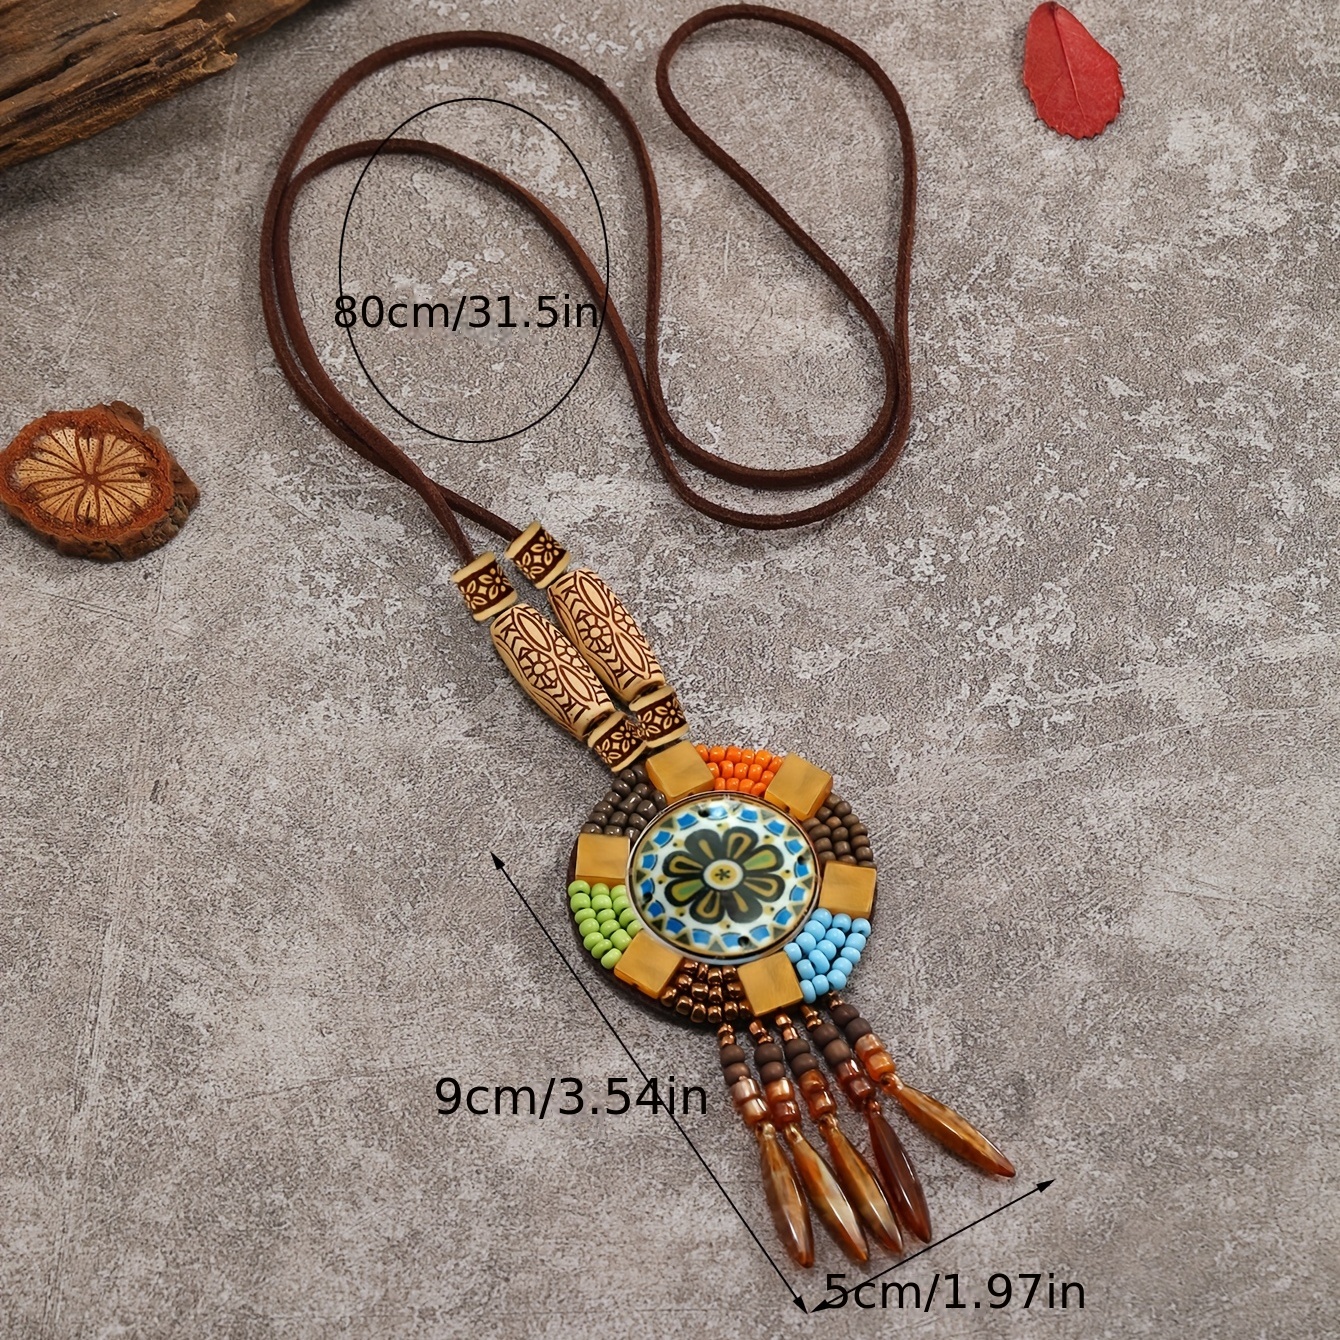 Dropship 3Pcs Vintage Handmade Wood Pendant With Cute Charms Long Leather  Necklace Sweater Chain For Girl Women Long Necklace All-Match Style Gift to  Sell Online at a Lower Price